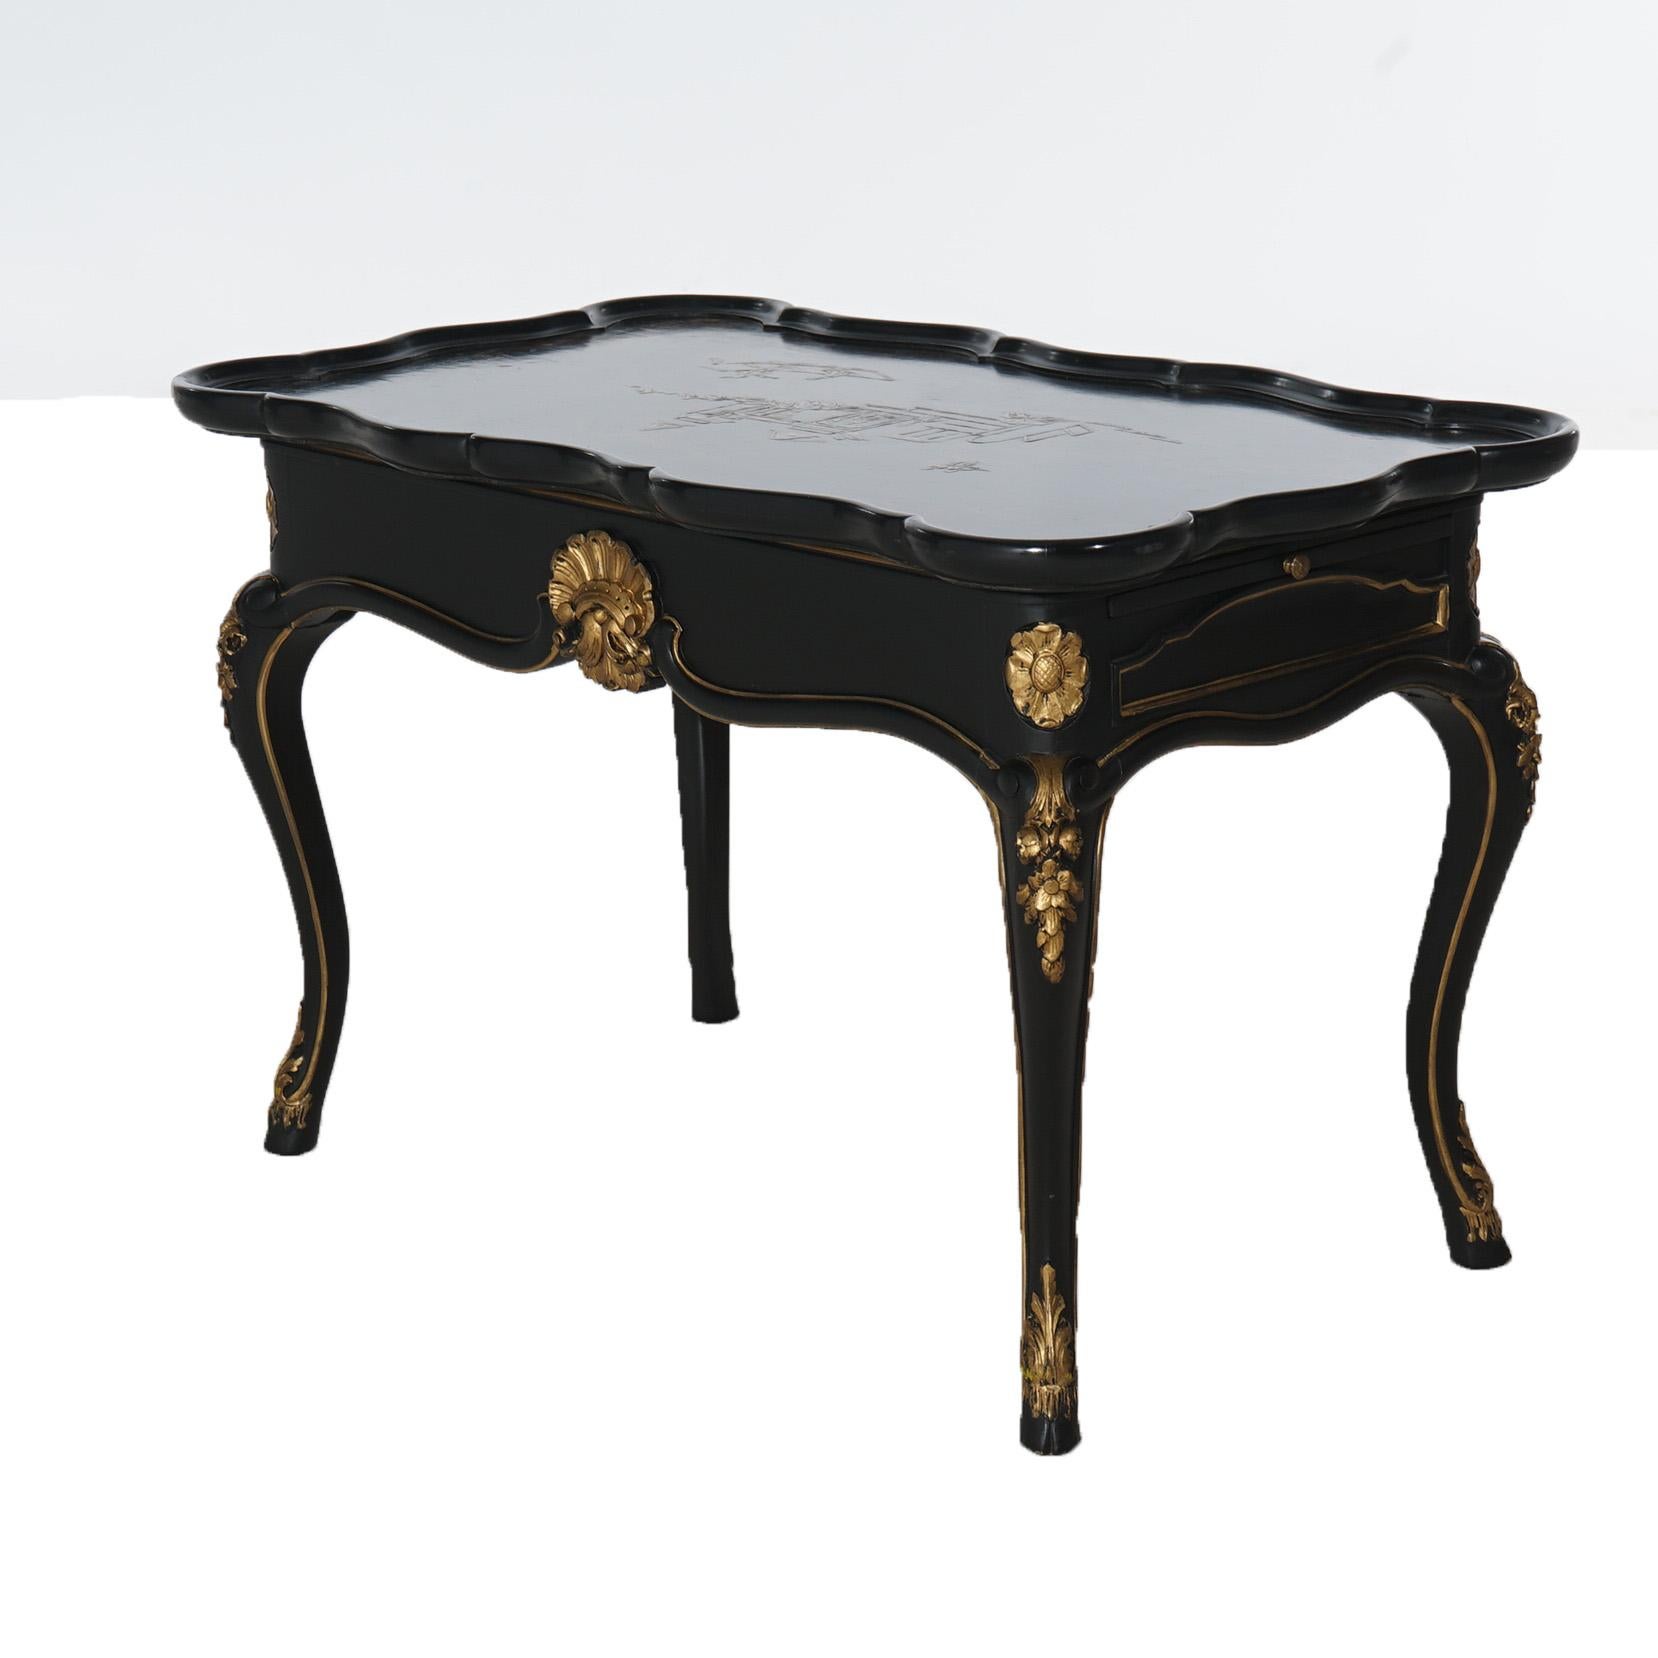 20th Century  Antique French Style Chinoiserie Gilt Decorated Ebonized Low Tea Table C1930